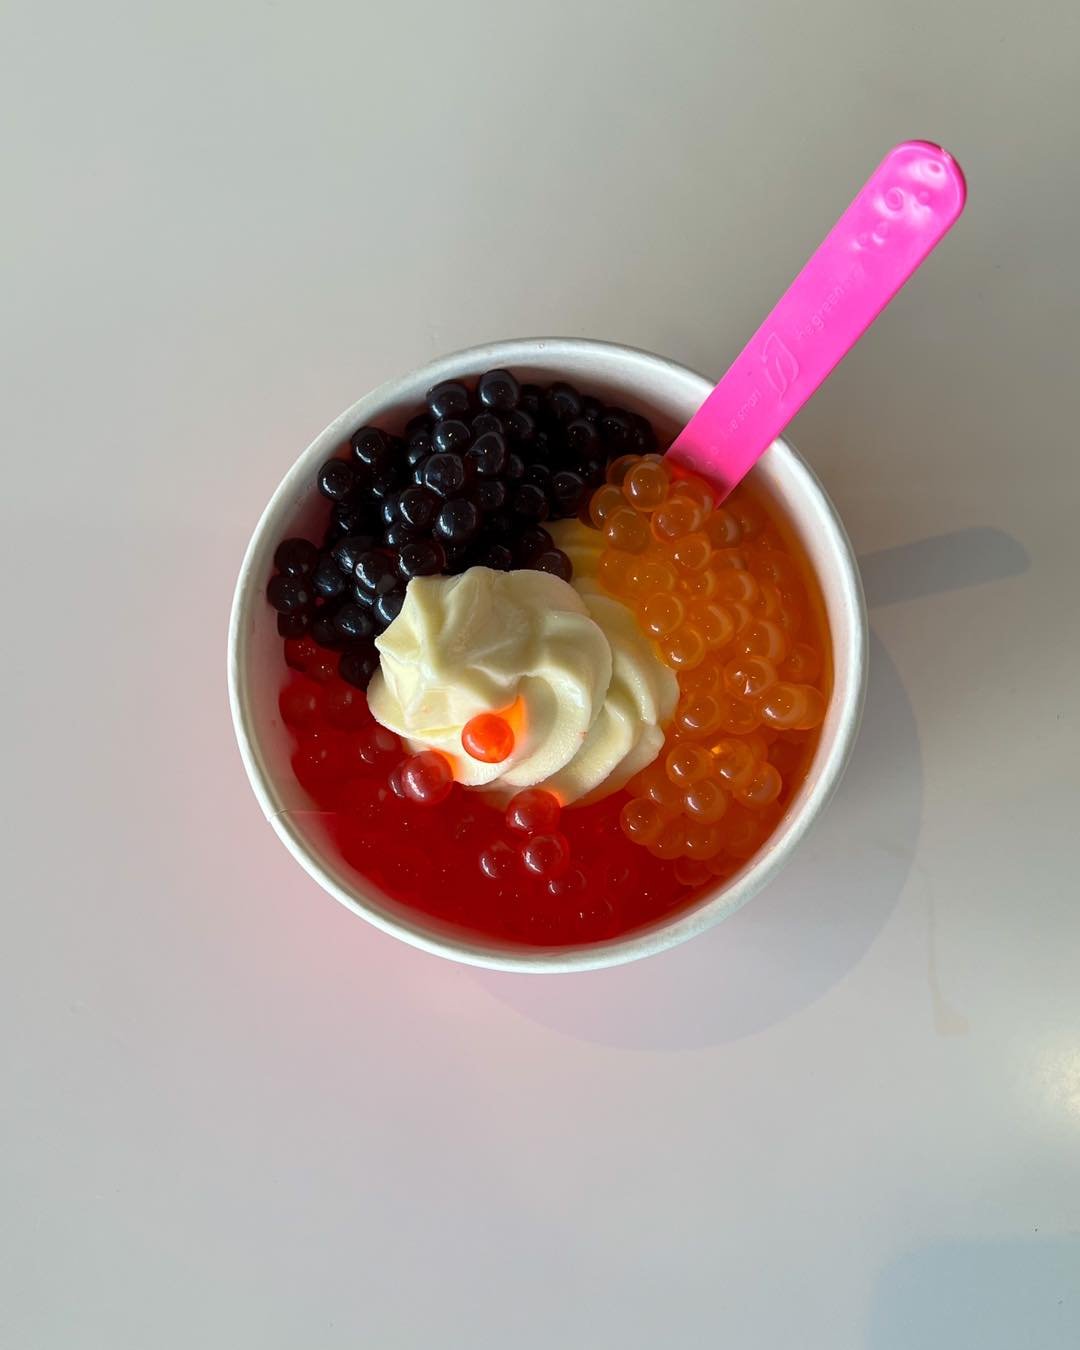 Froyo perfection topped with a trio of boba flavors! 🍓🫐🥭 Which boba flavor is your favorite: blueberry, mango, or strawberry? Let us know!
 #Froyo #BobaLovers #FlavorfulToppings #froyostl